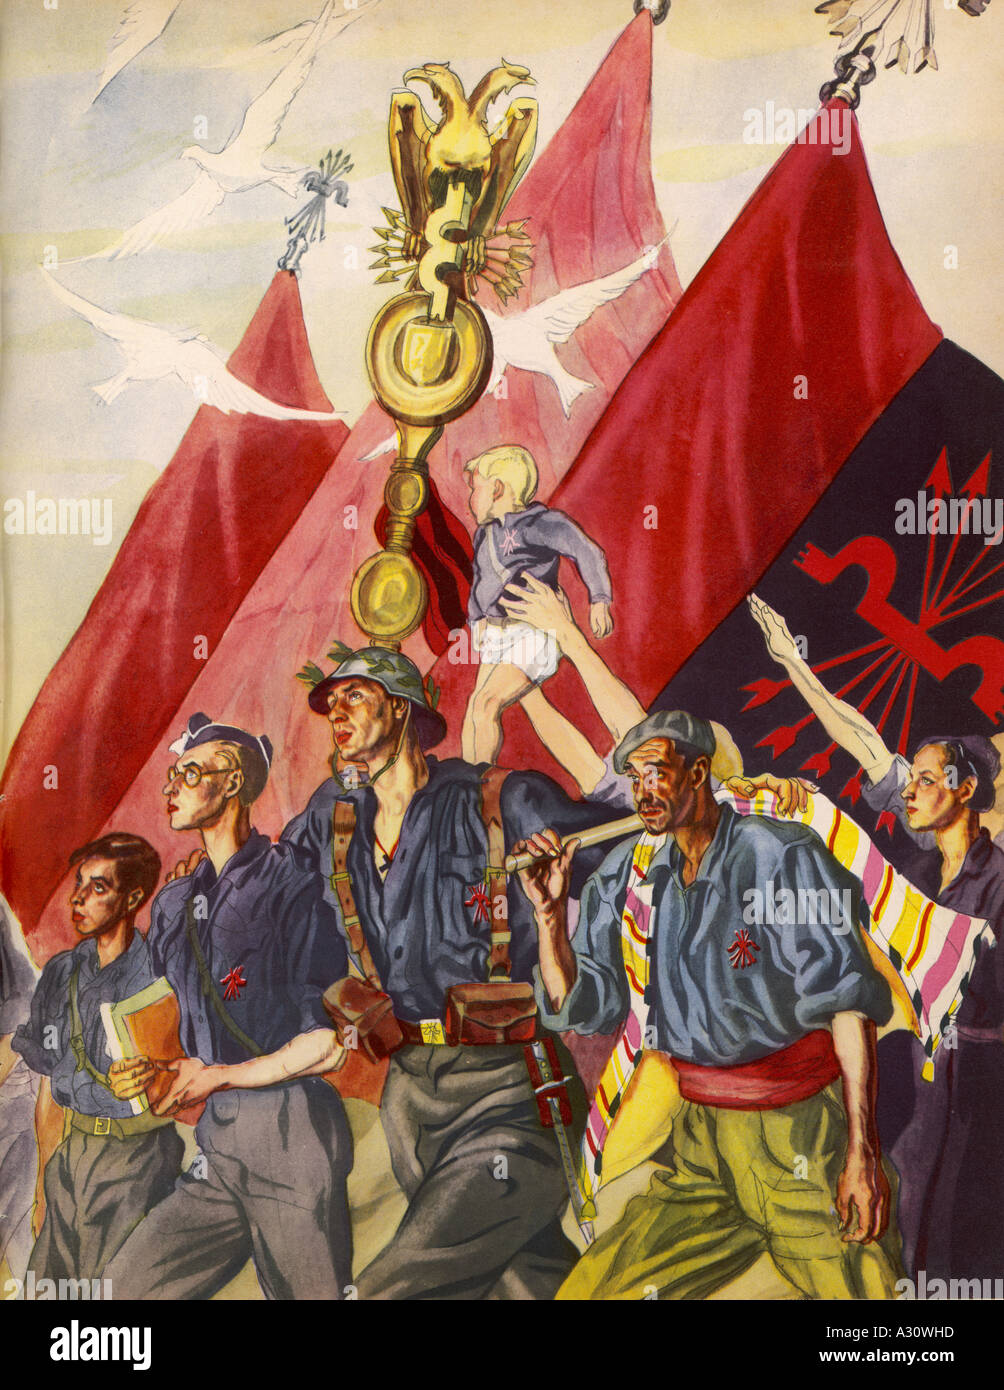 Falangist March Poster Stock Photo